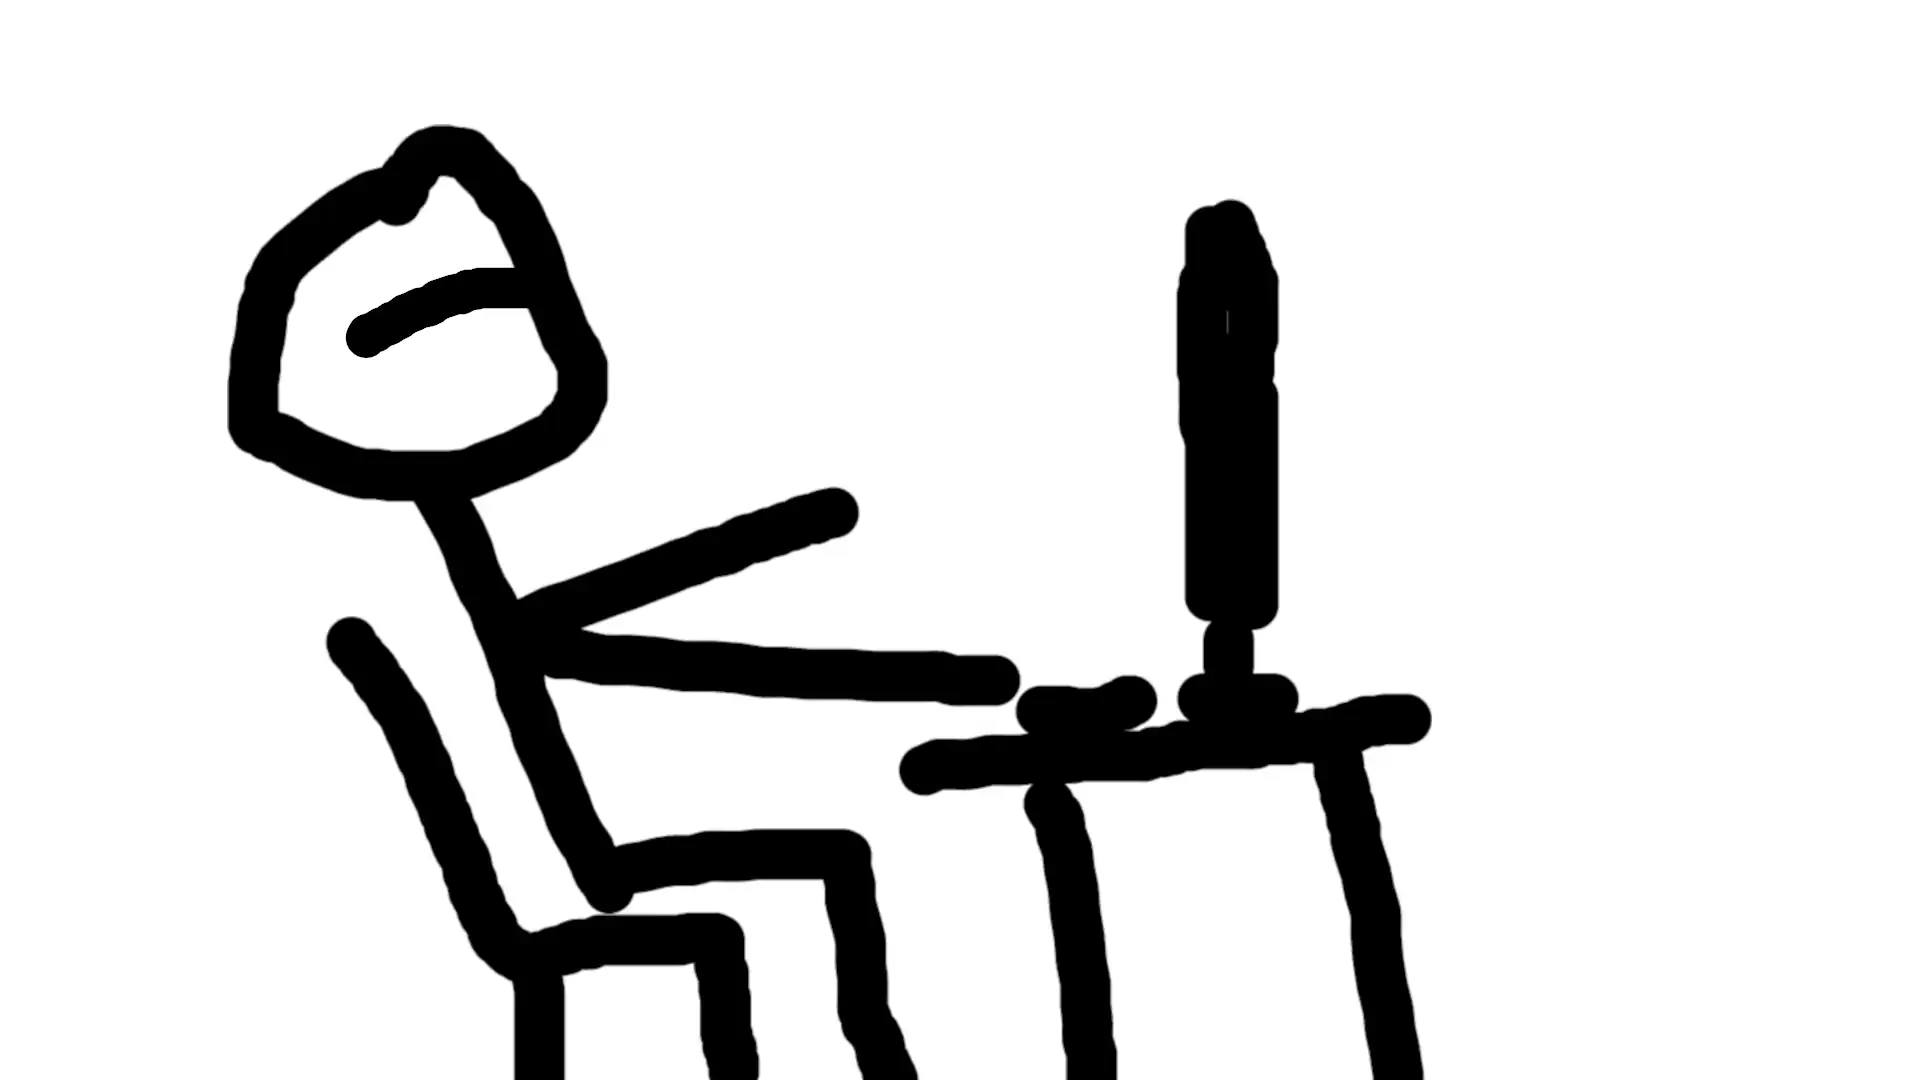 A crudely drawn stick figure using a computer